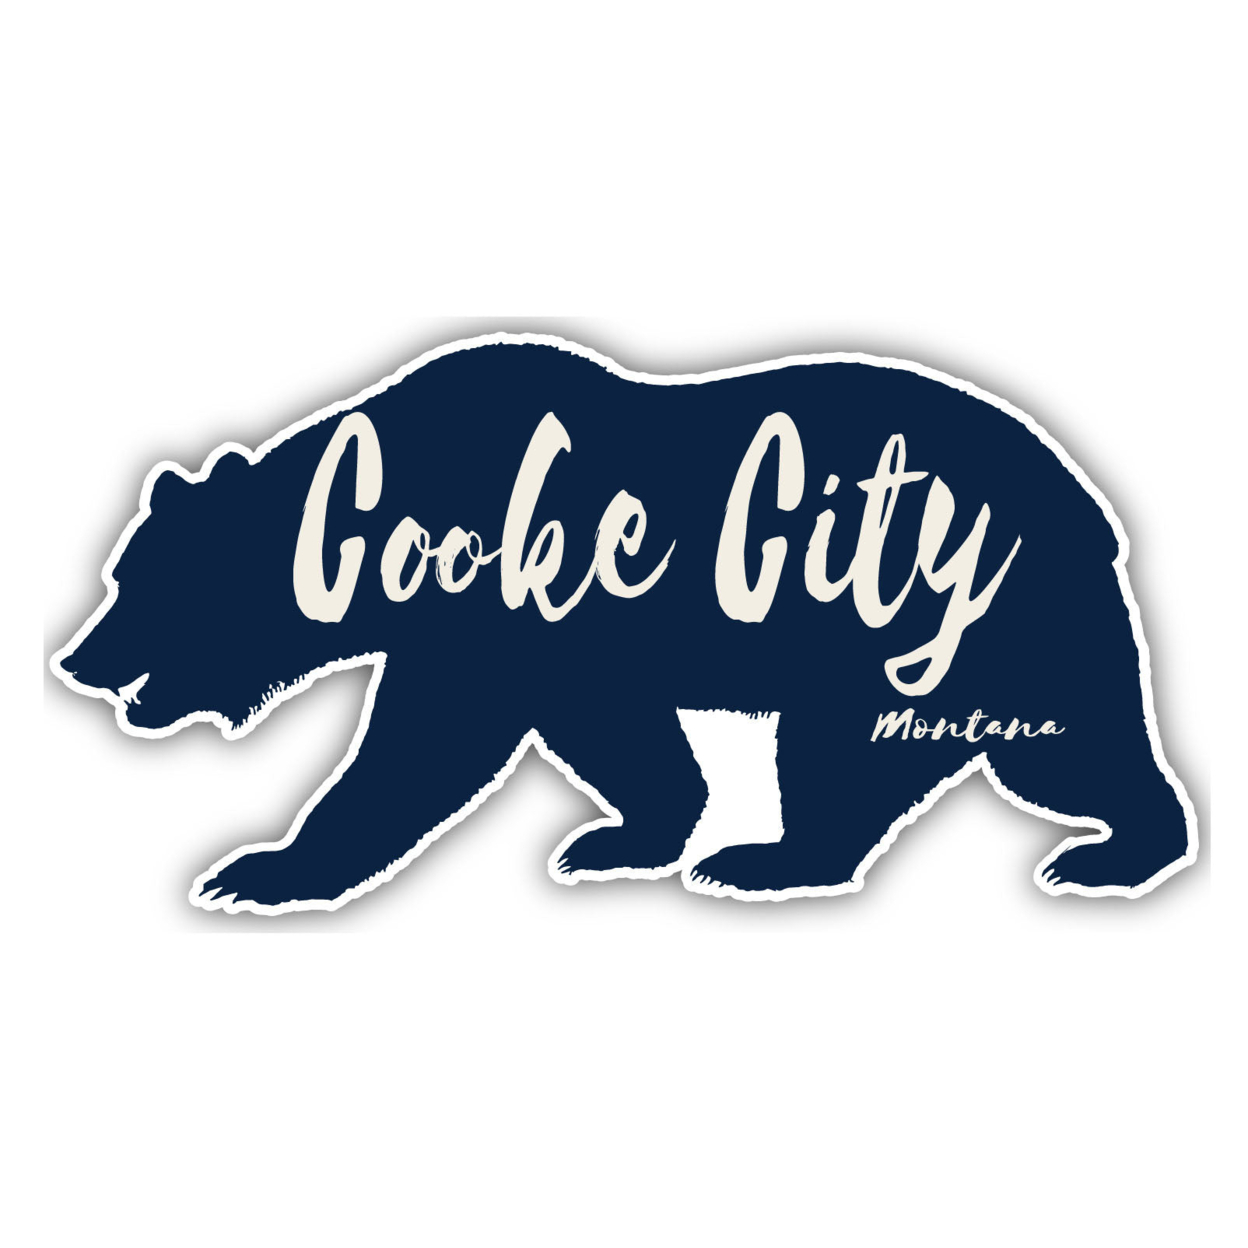 Cooke City Montana Souvenir Decorative Stickers (Choose Theme And Size) - 4-Pack, 8-Inch, Bear